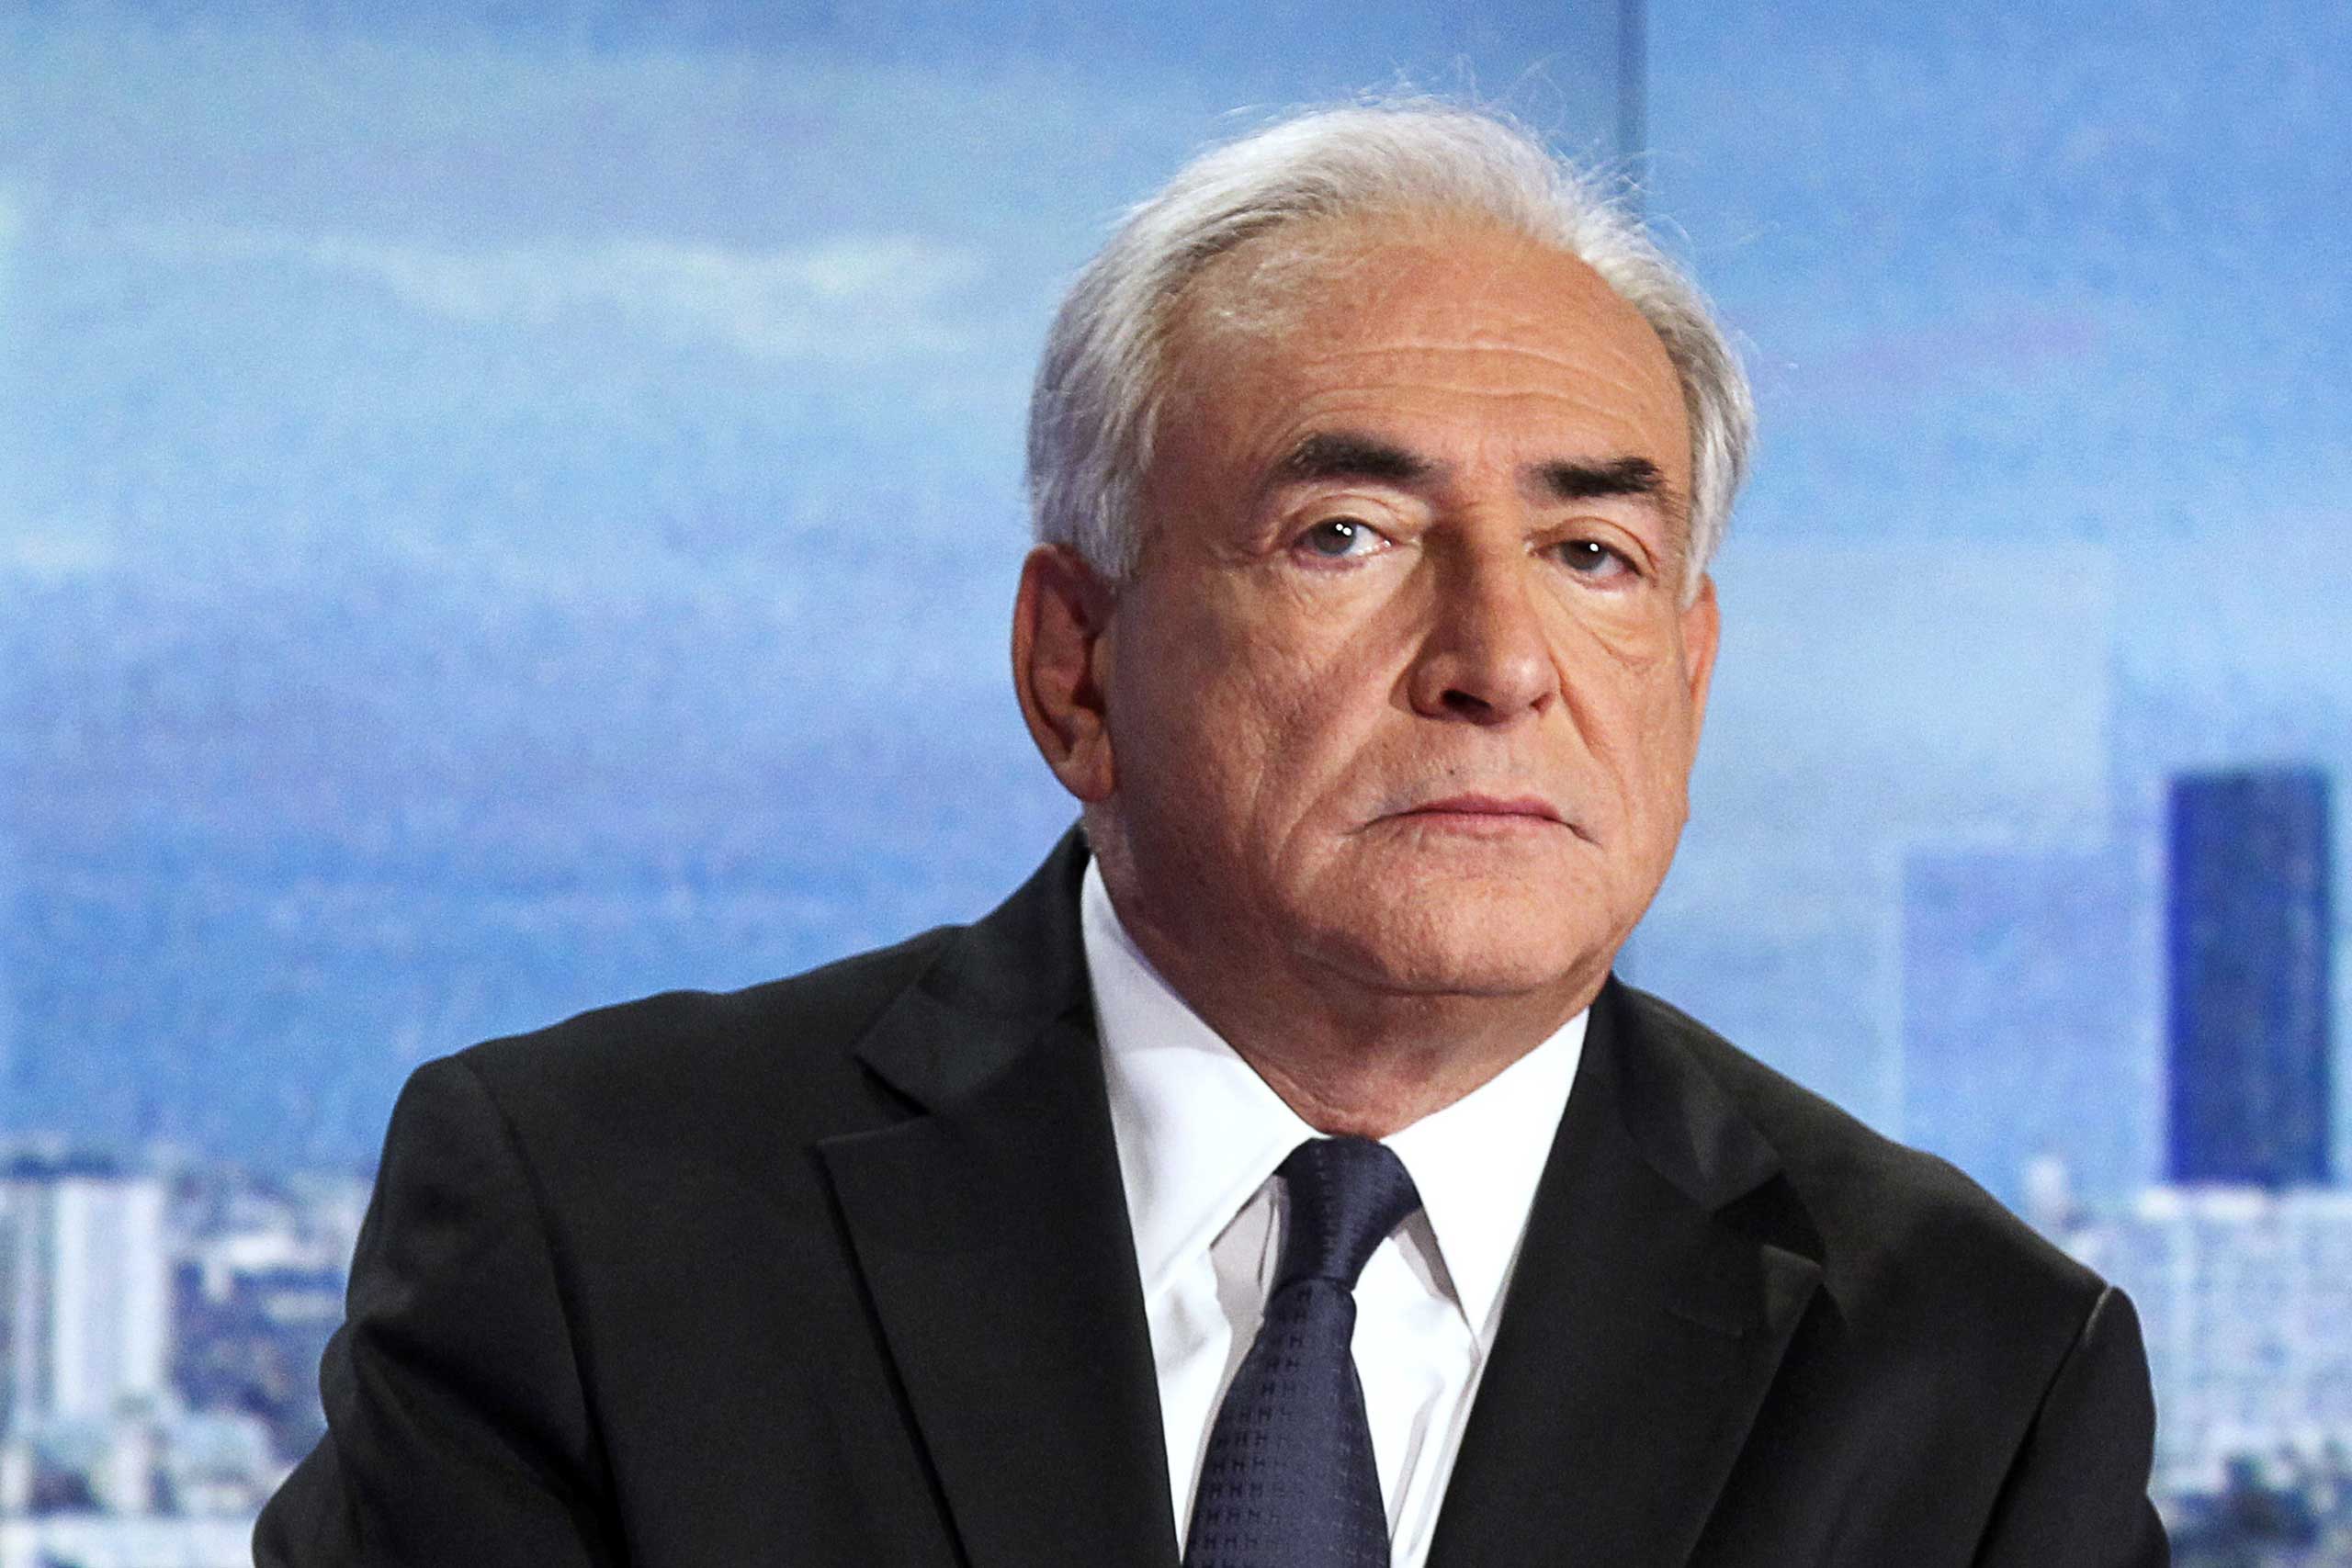 Former International Monetary Fund chief Dominique Strauss-Kahn takes part in the news broadcast of French TV station TF1, in Boulogne-Billancourt, France on Sept. 18, 2011.